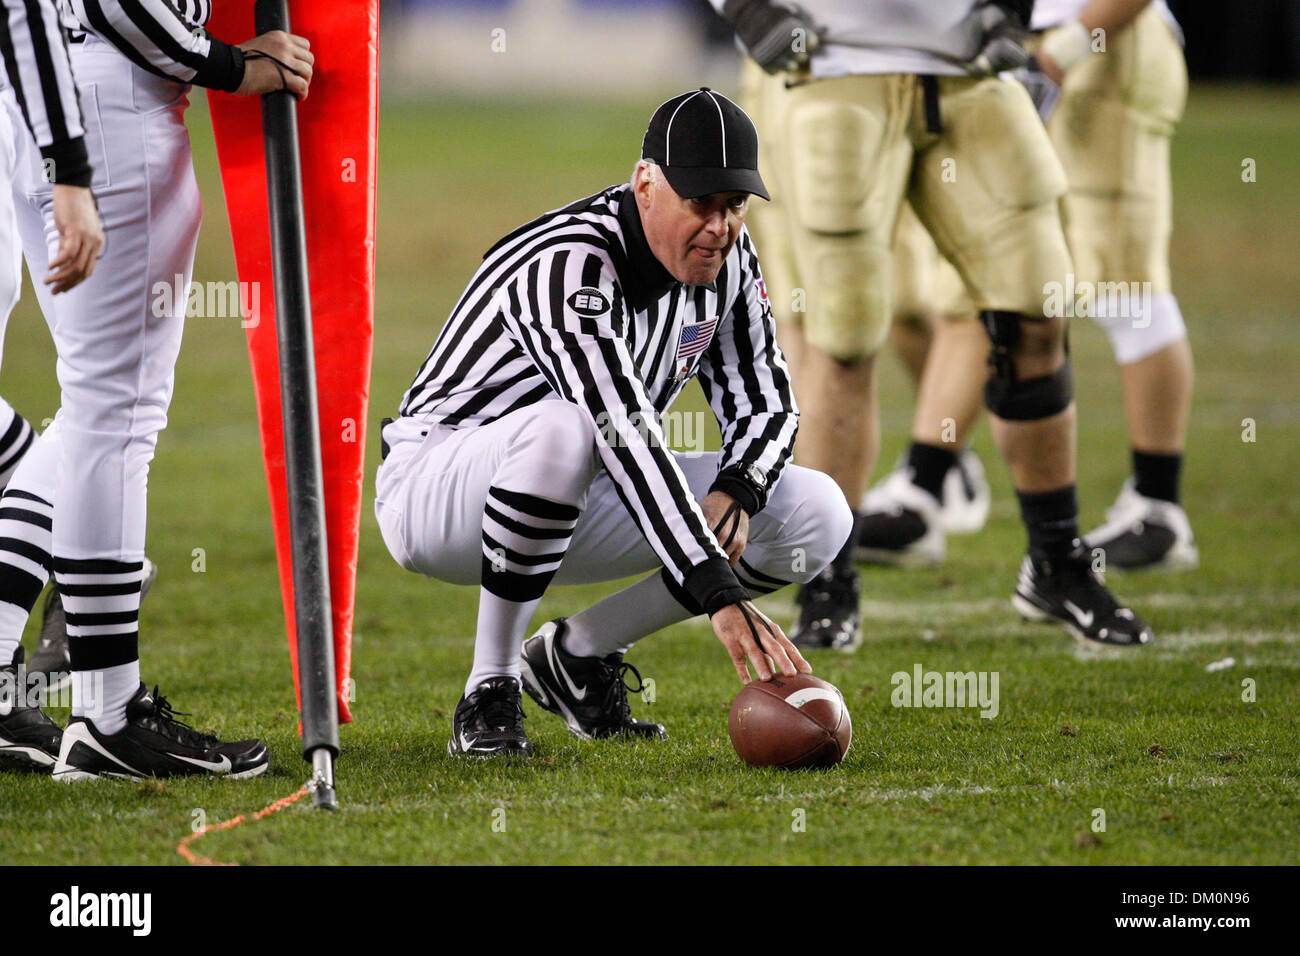 Dec. 12, 2009 - Philadelphia, Pennsylvania, U.S - 12 December 2009:  Officials during football action in the game between the Army Black Knights and the Navy Midshipmen played at Lincoln Financial Field in Philadelphia, Pennsylvania.  Navy defeated Army 17-3 for their eighth straight win in the series. (Credit Image: © Alex Cena/Southcreek Global/ZUMApress.com) Stock Photo